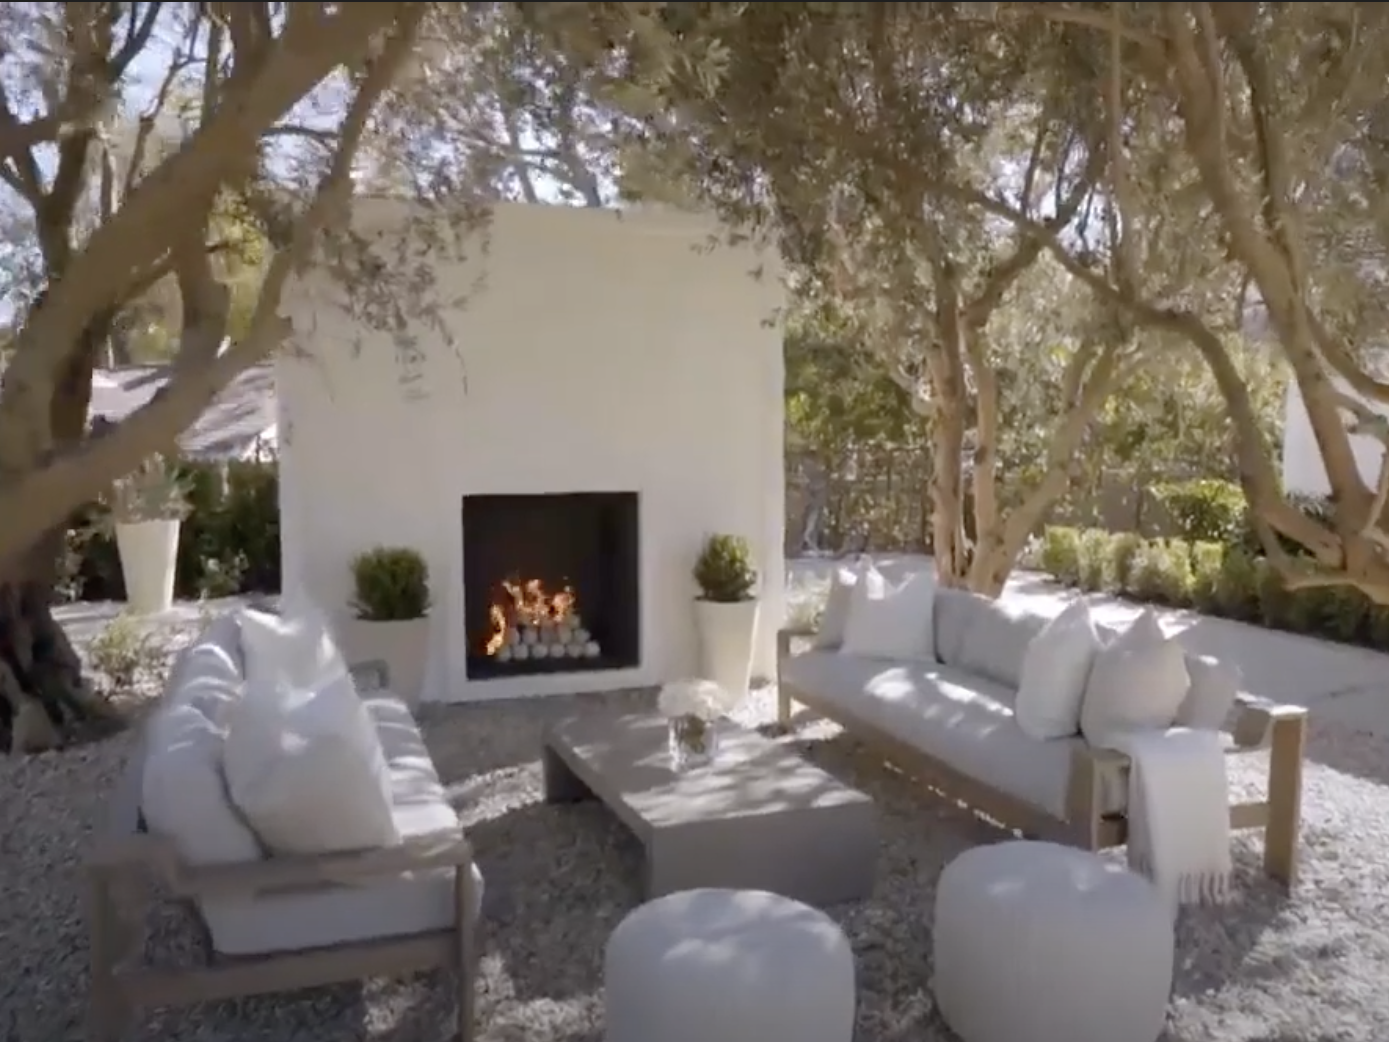 An outdoor fireplace with two couches, a coffee table, and two cushions surrounded by olive trees.